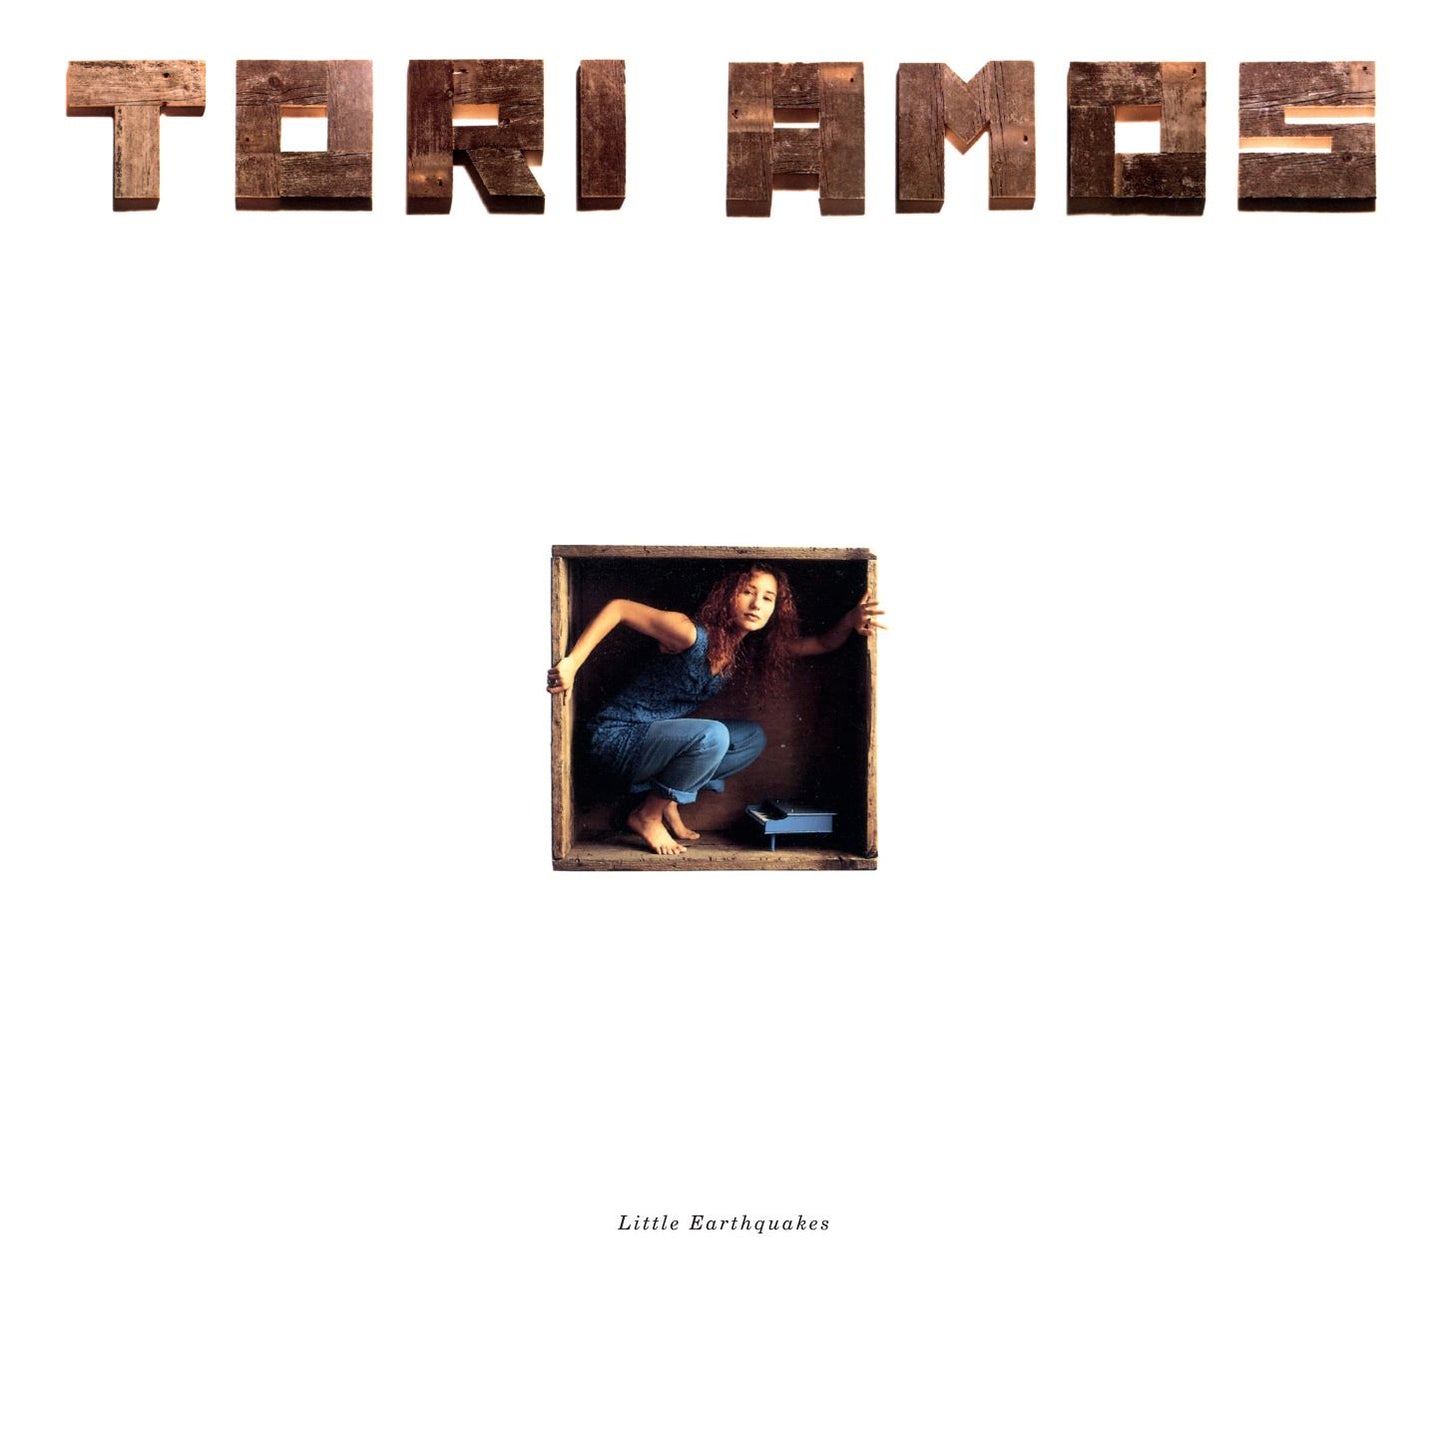 Tori Amos - Little Earthquakes: 30th Anniversary Remastered Edition